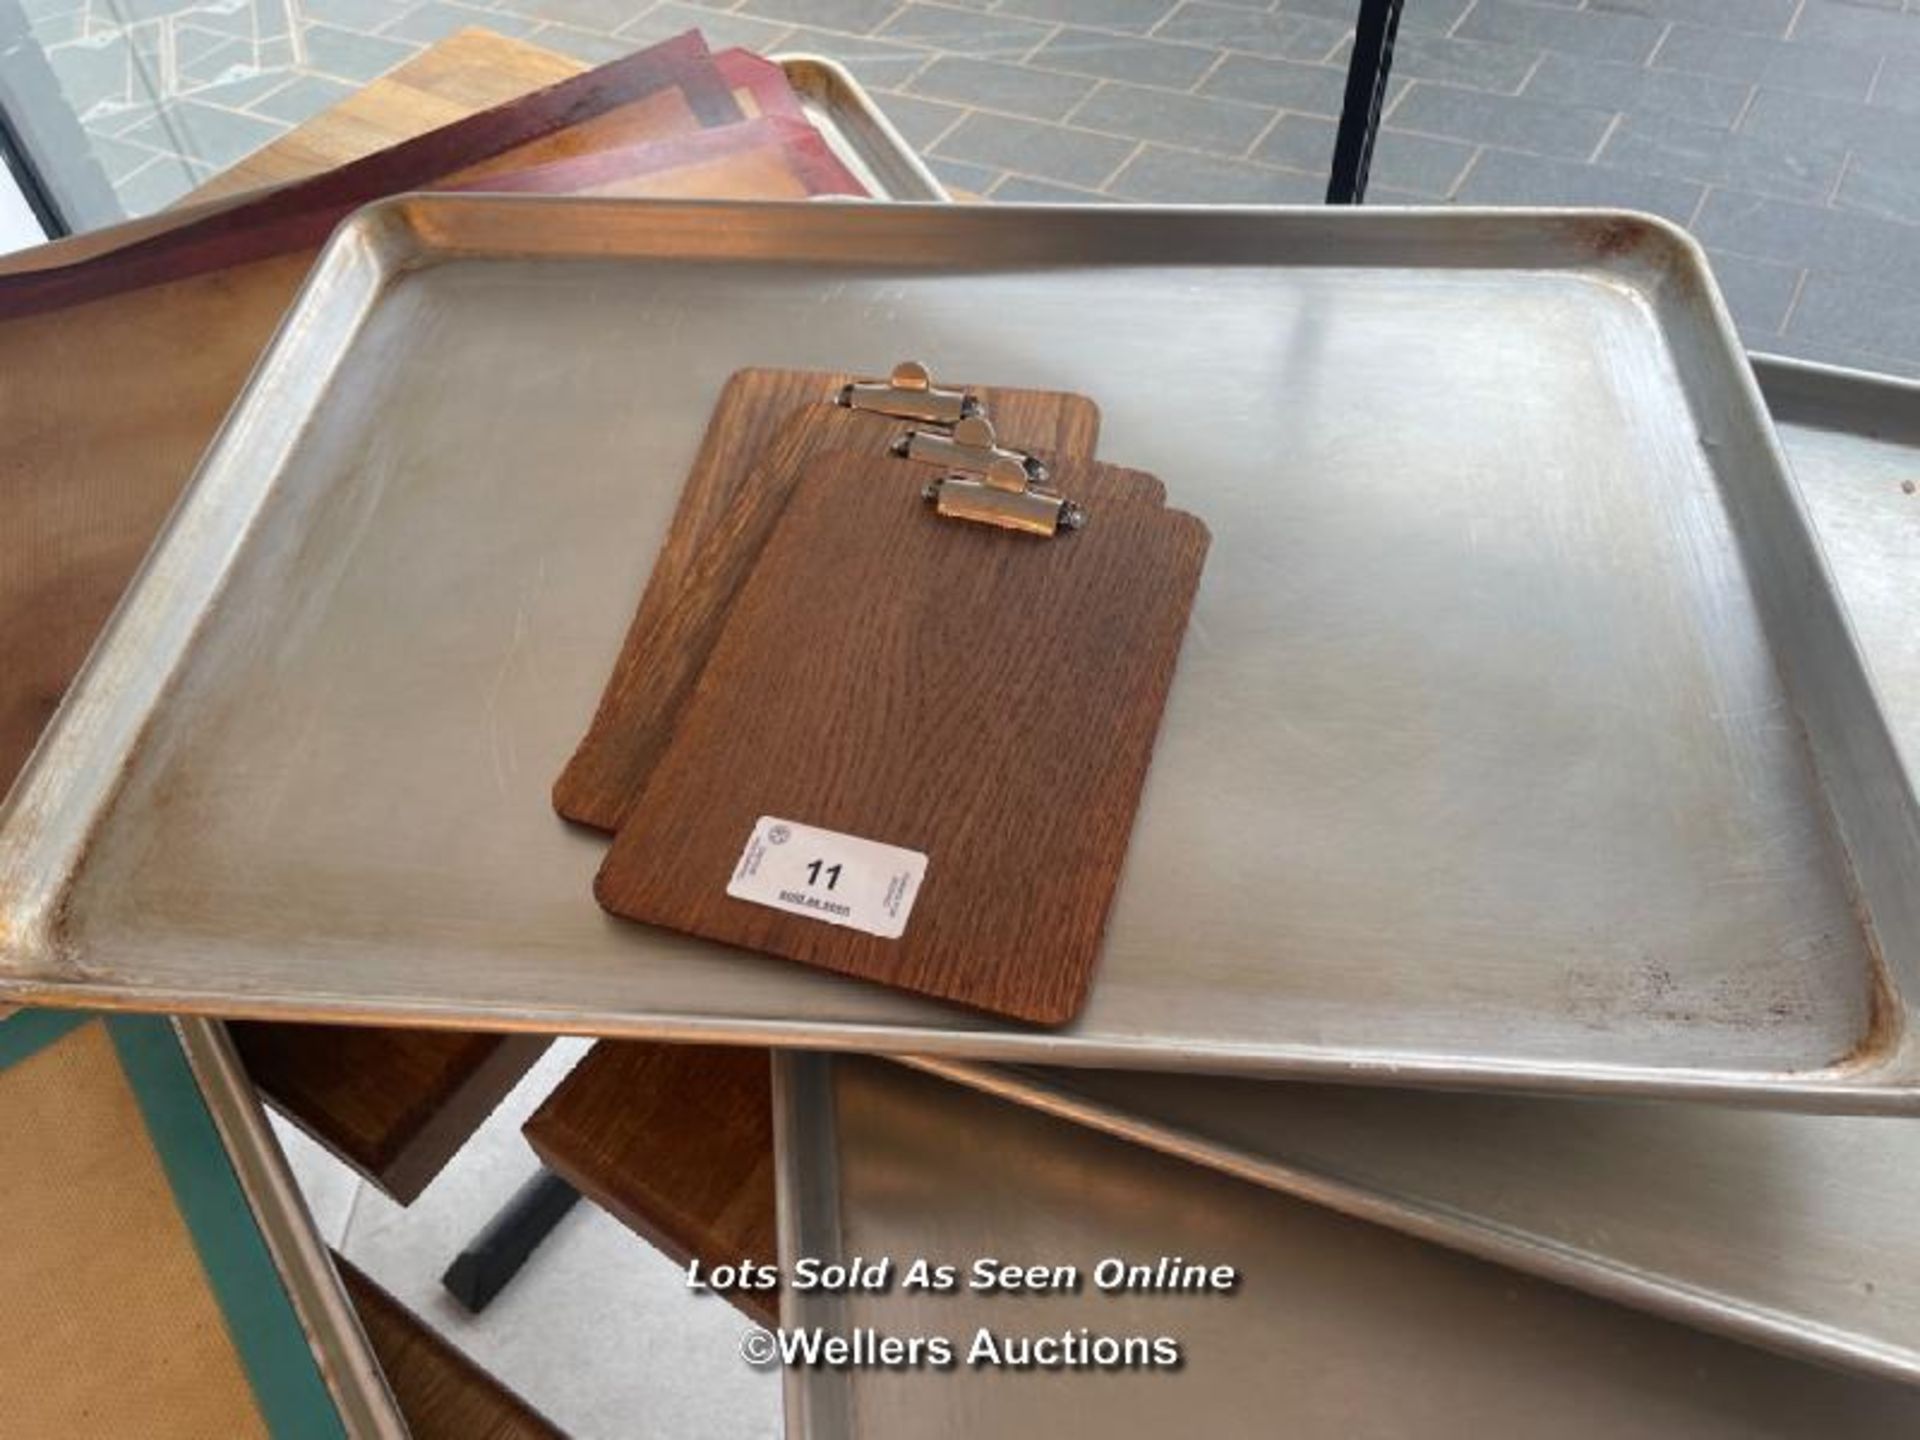 X6 TRAYS AND X3 CLIP BOARDS - INC. X4 LARGE TRAYS -66CM L X 45CM W / THE LOTS IN THIS AUCTION ARE - Image 3 of 3